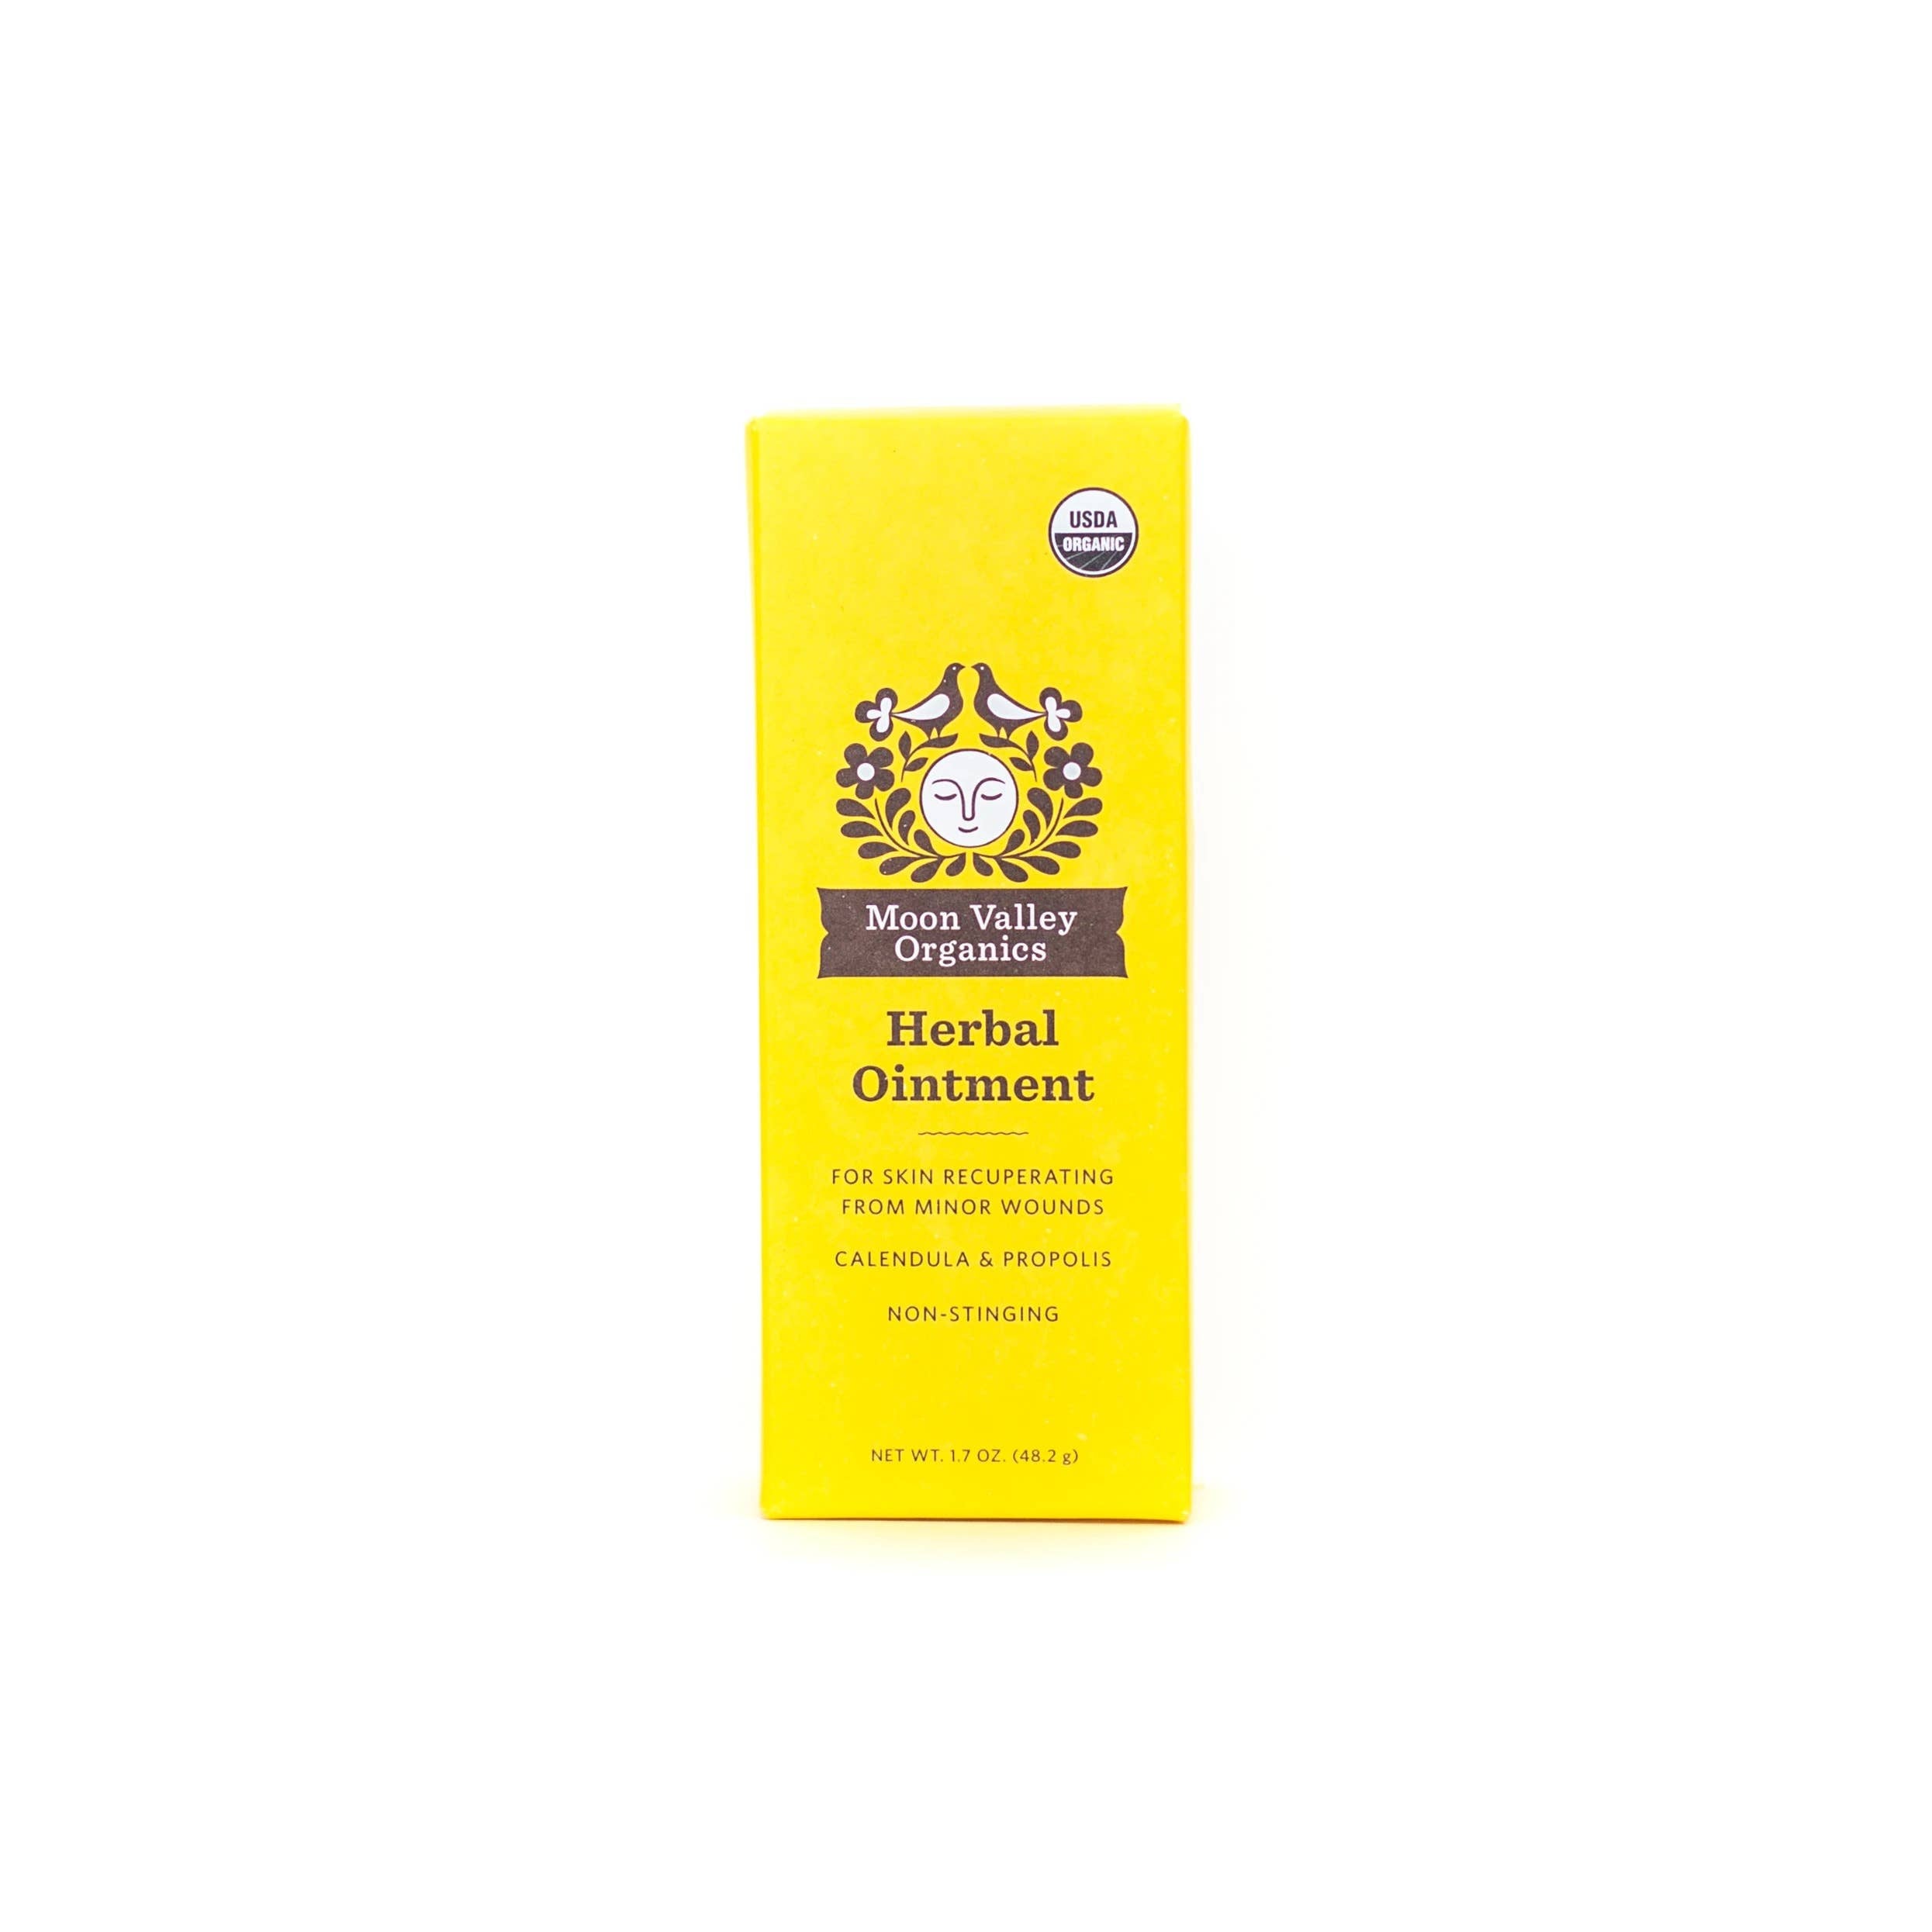 Moon Valley Organics Herbal Ointment